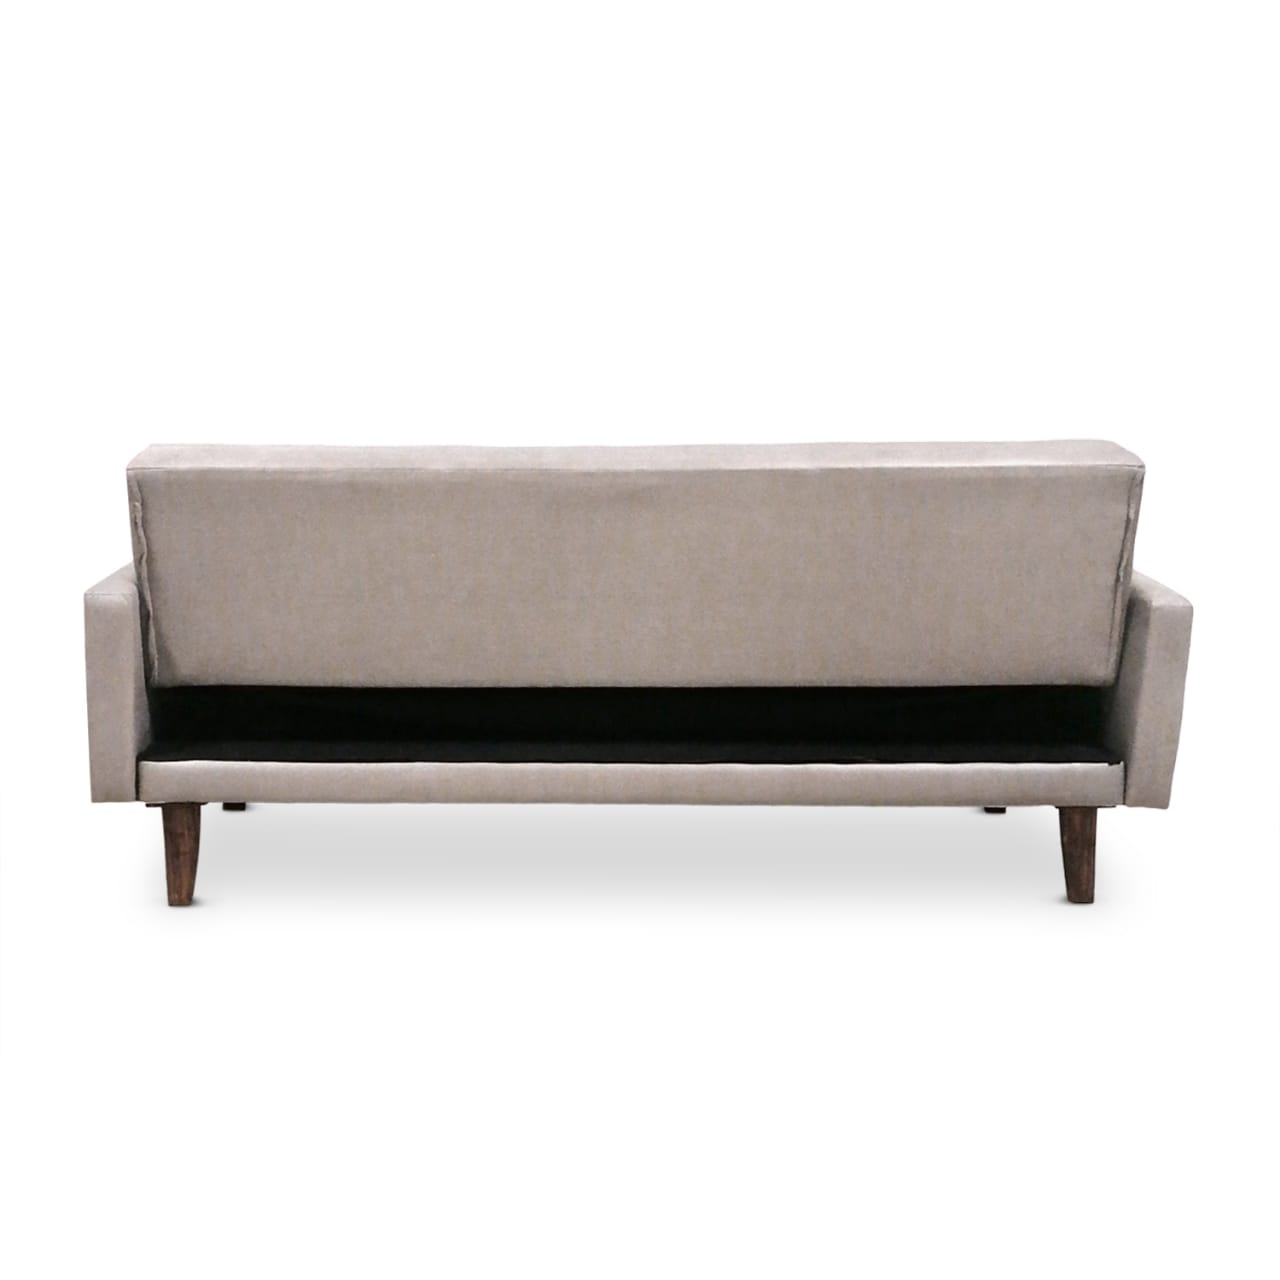 L Shape 3 seater Sleeper Couch Black November Sale - That Couch Place